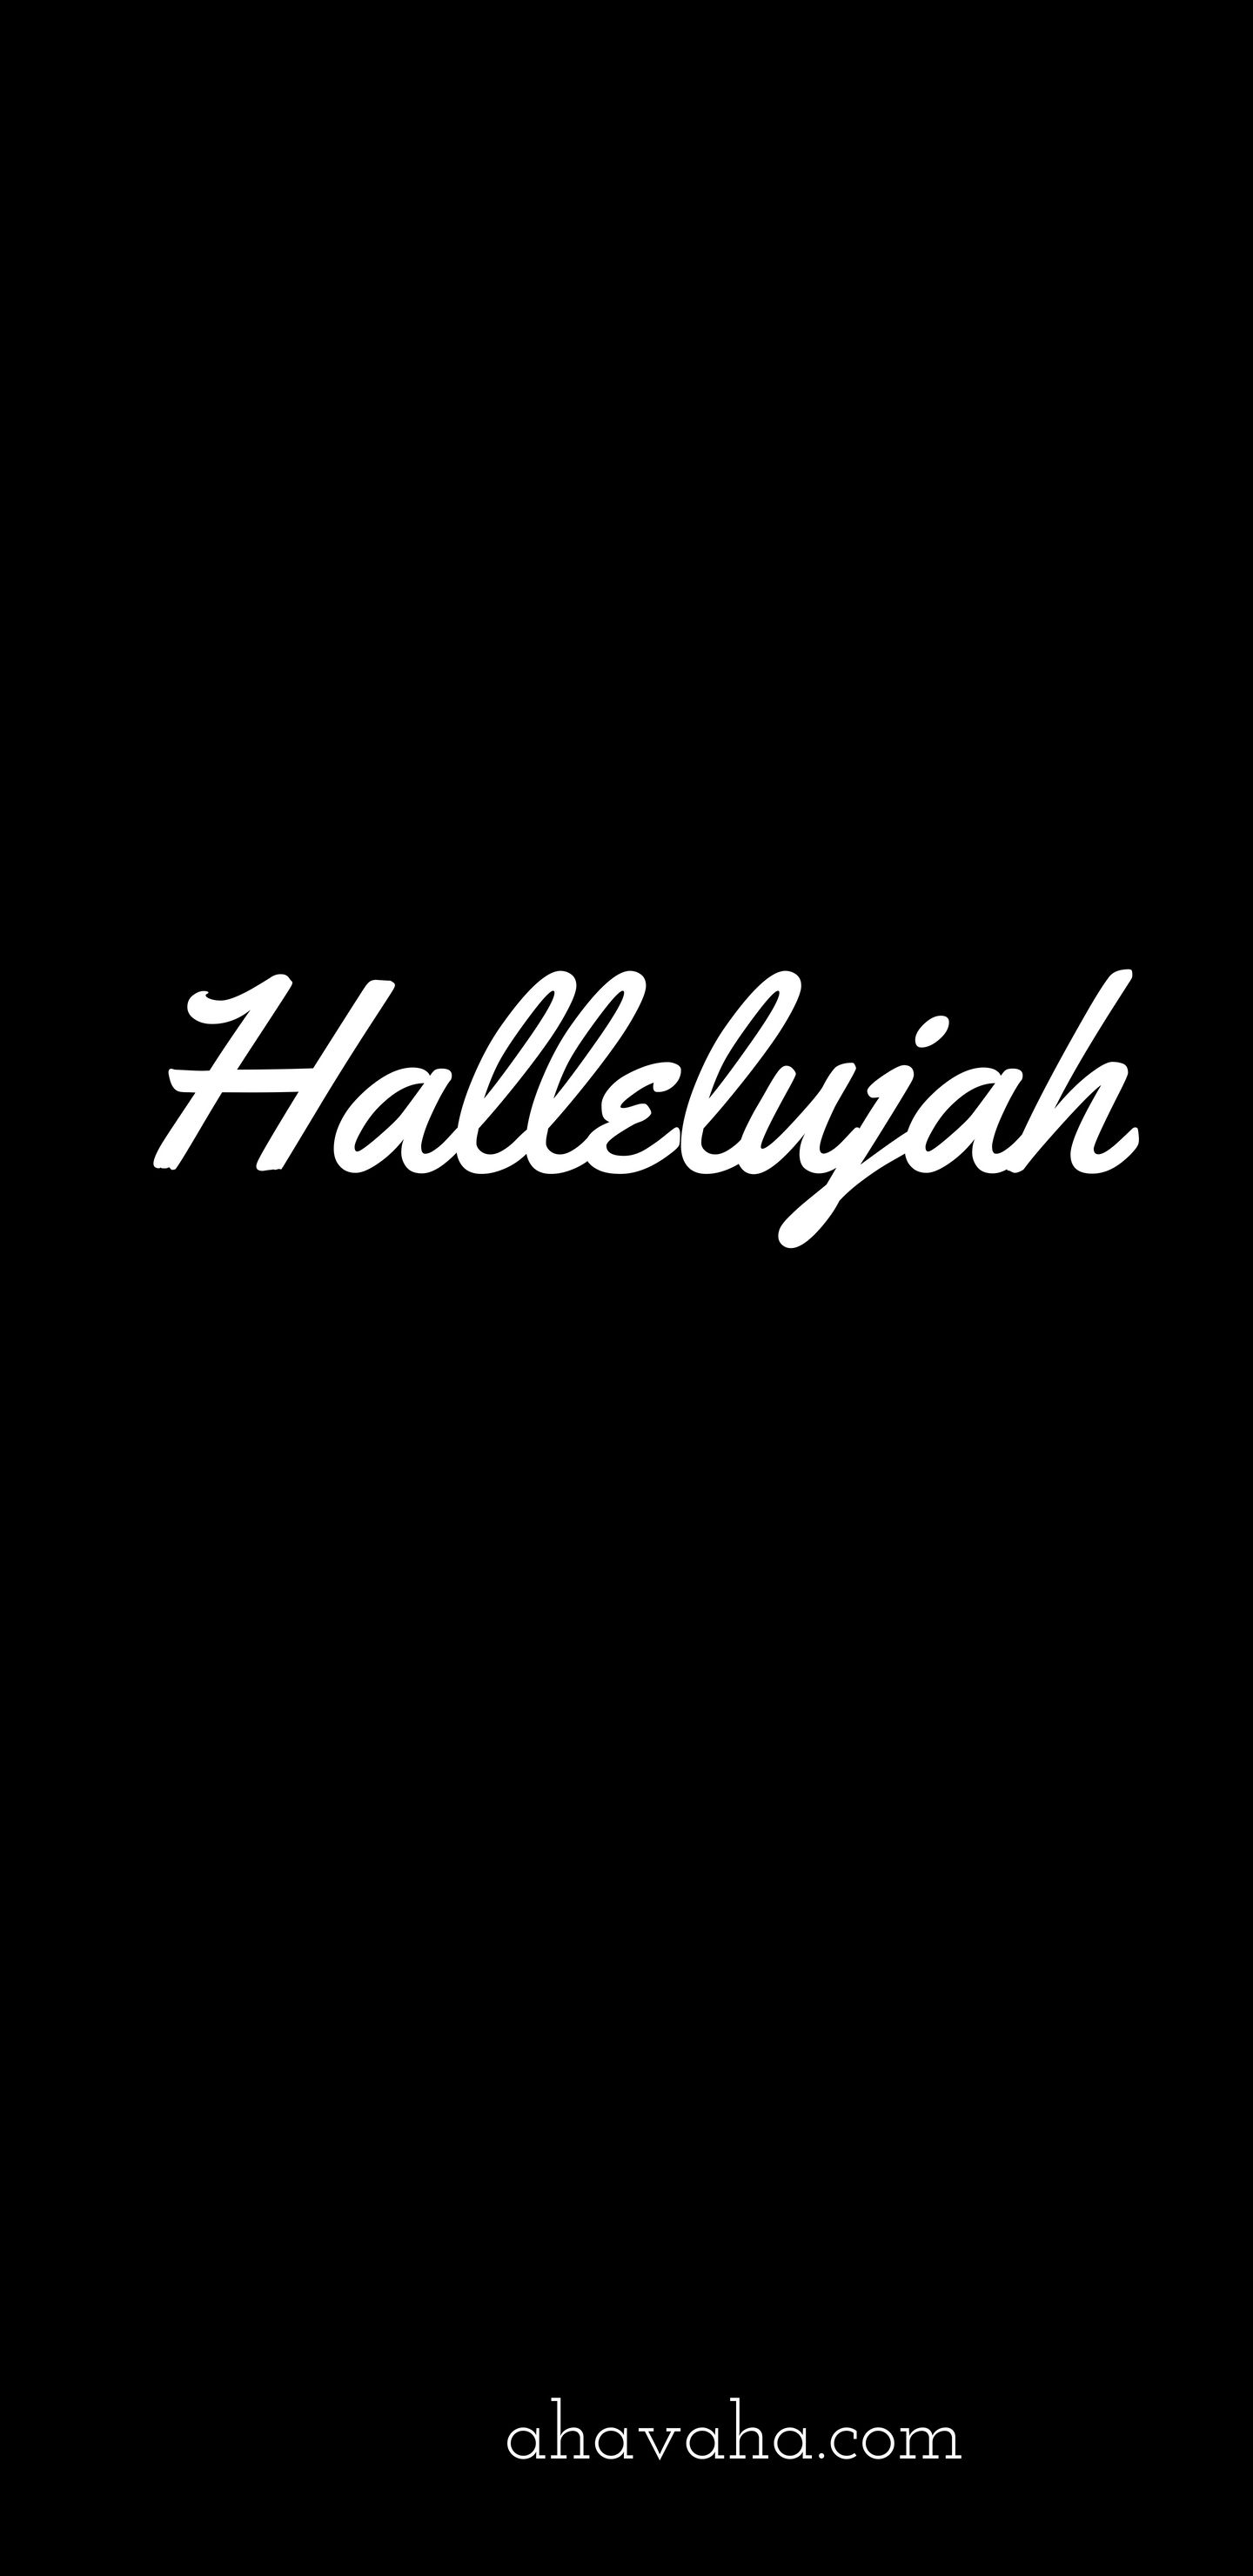 Hallelujah Themed Free Christian Wallpaper and Screensaver Mobile Phone Black Background 30